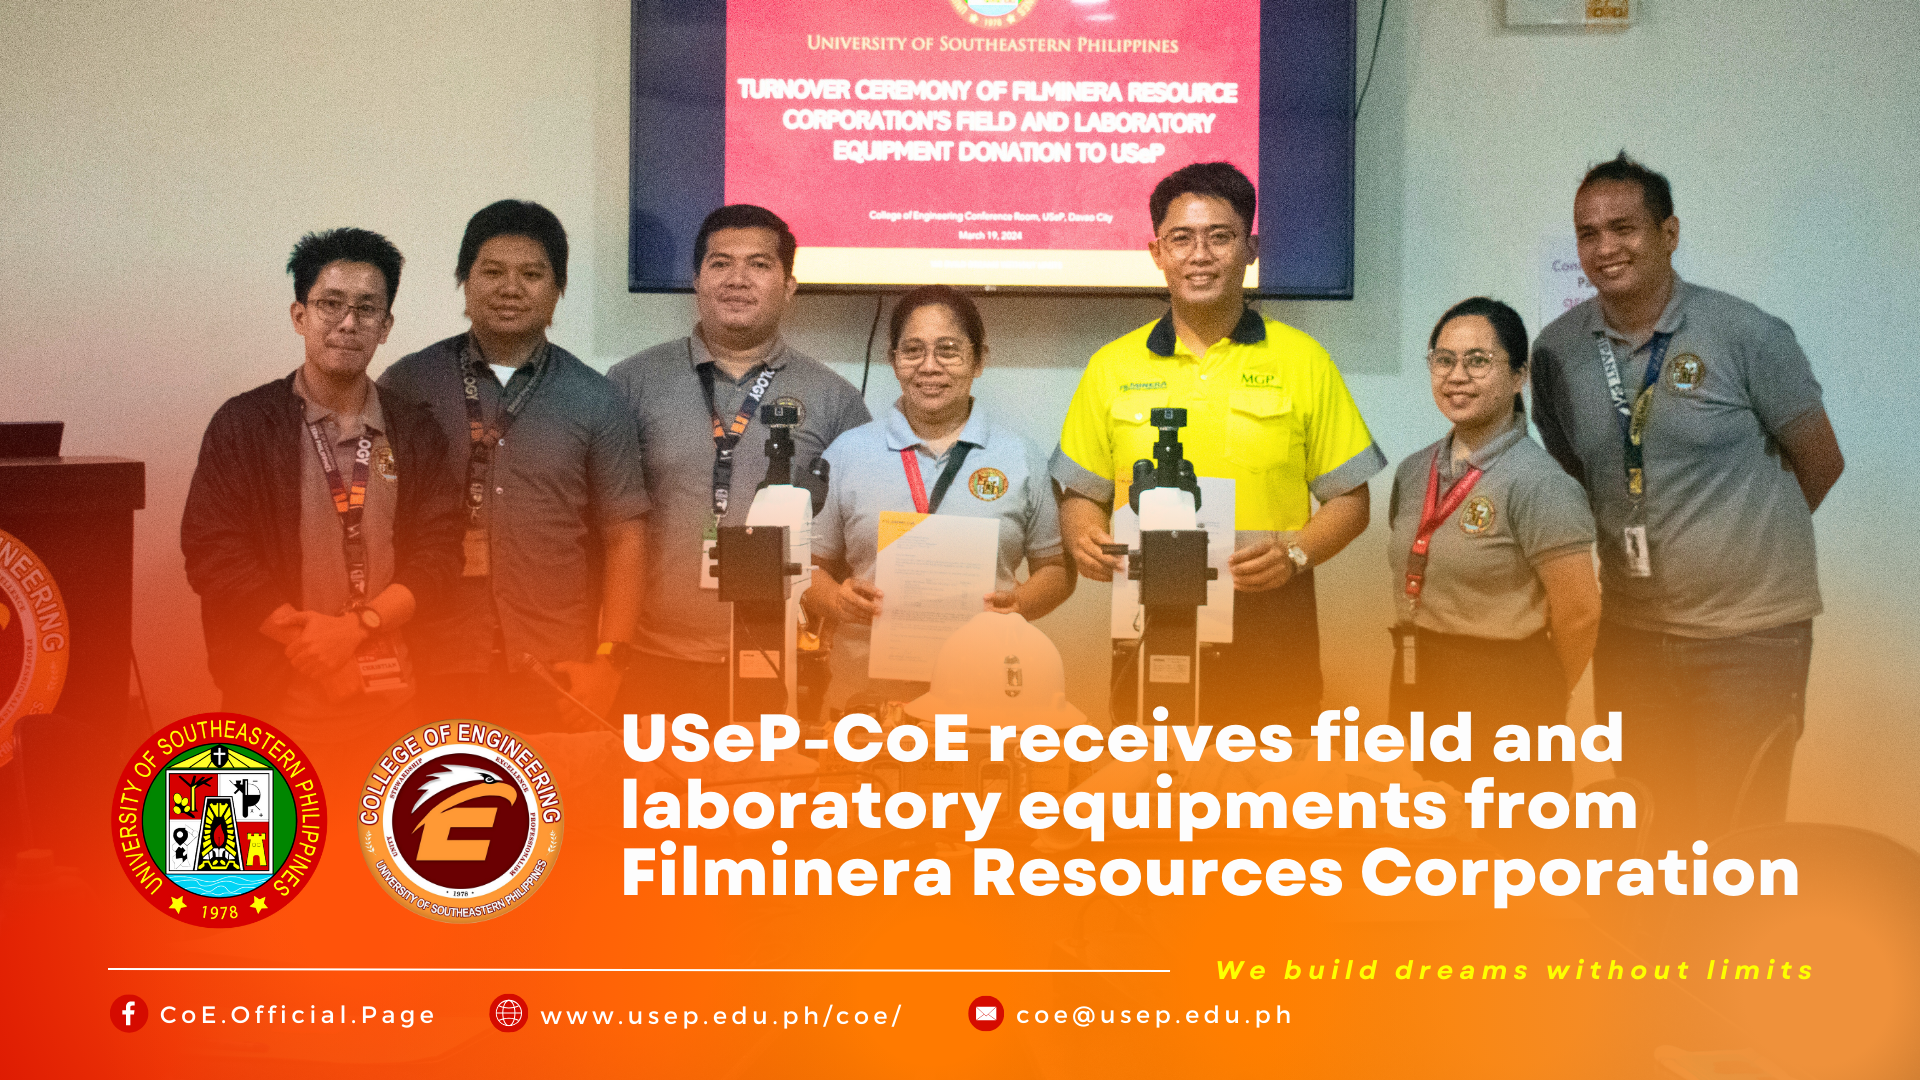 USeP-CoE receives field and laboratory equipments from Filminera Resources Corporation